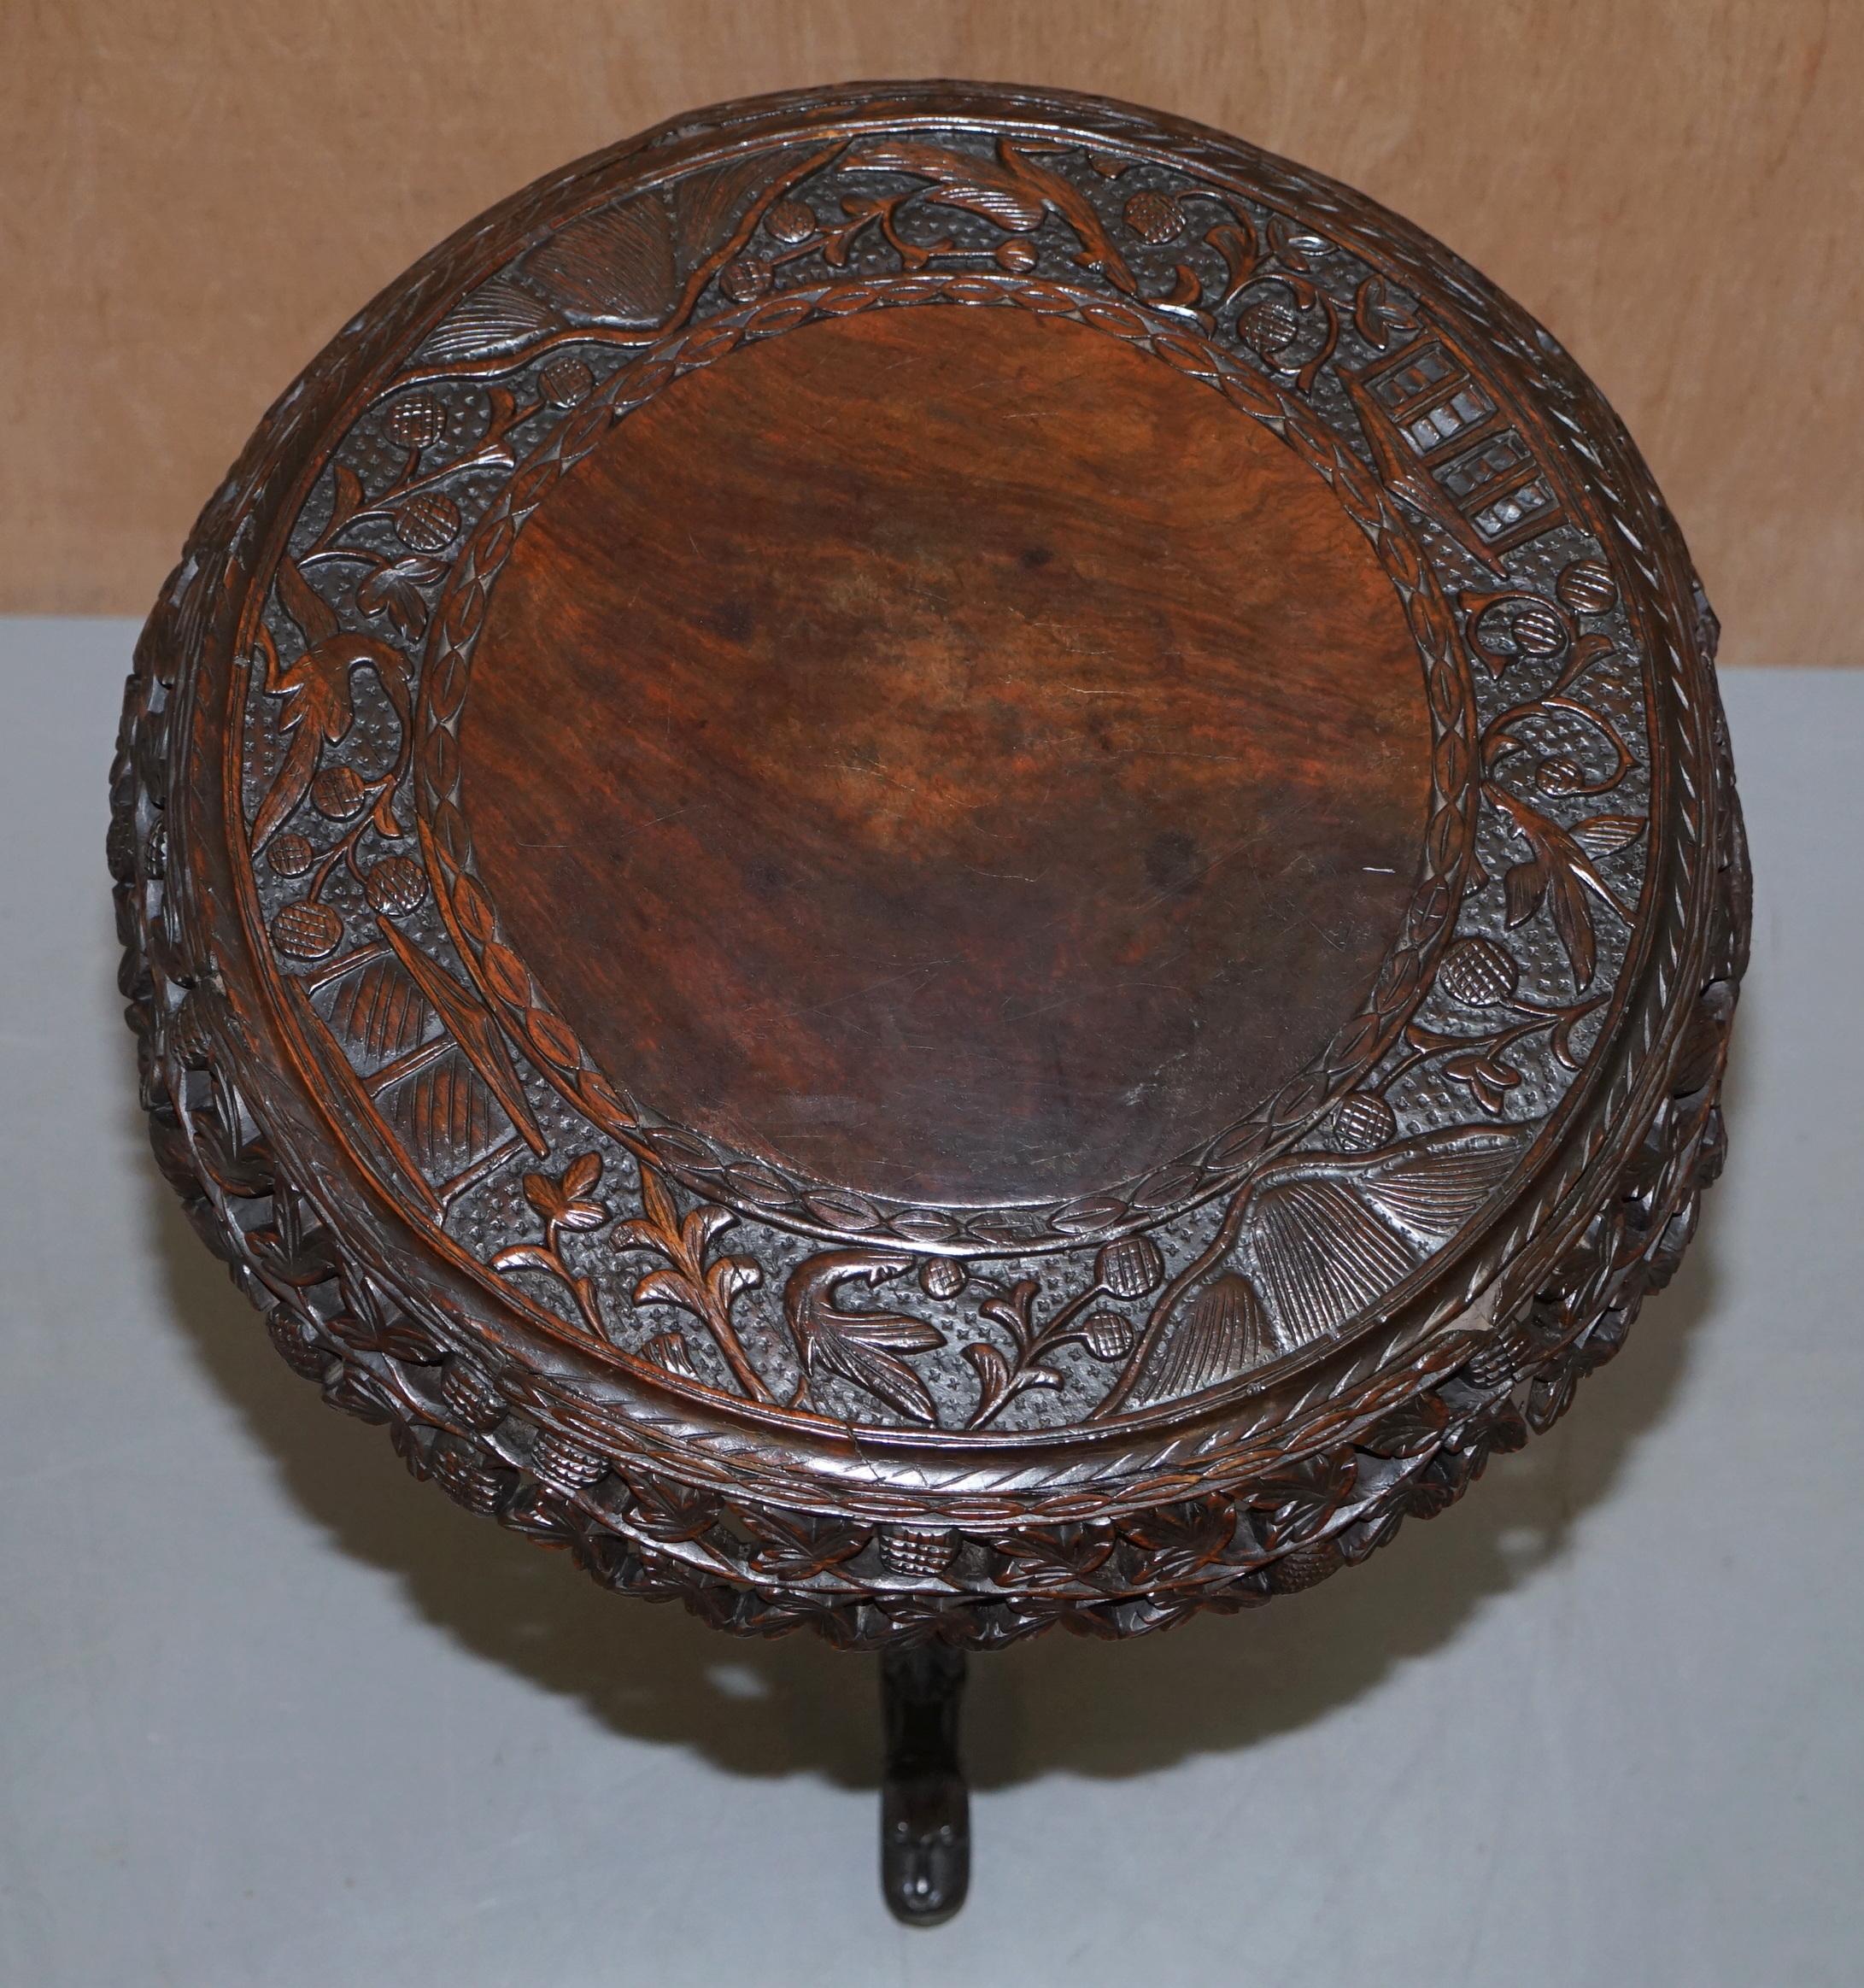 We are delighted to offer for sale this stunning circa 1880 Anglo-Indian hand carved tilt top table in solid hardwood

A very good looking and collectable table, originally designed as a centre or occasional table table however by western